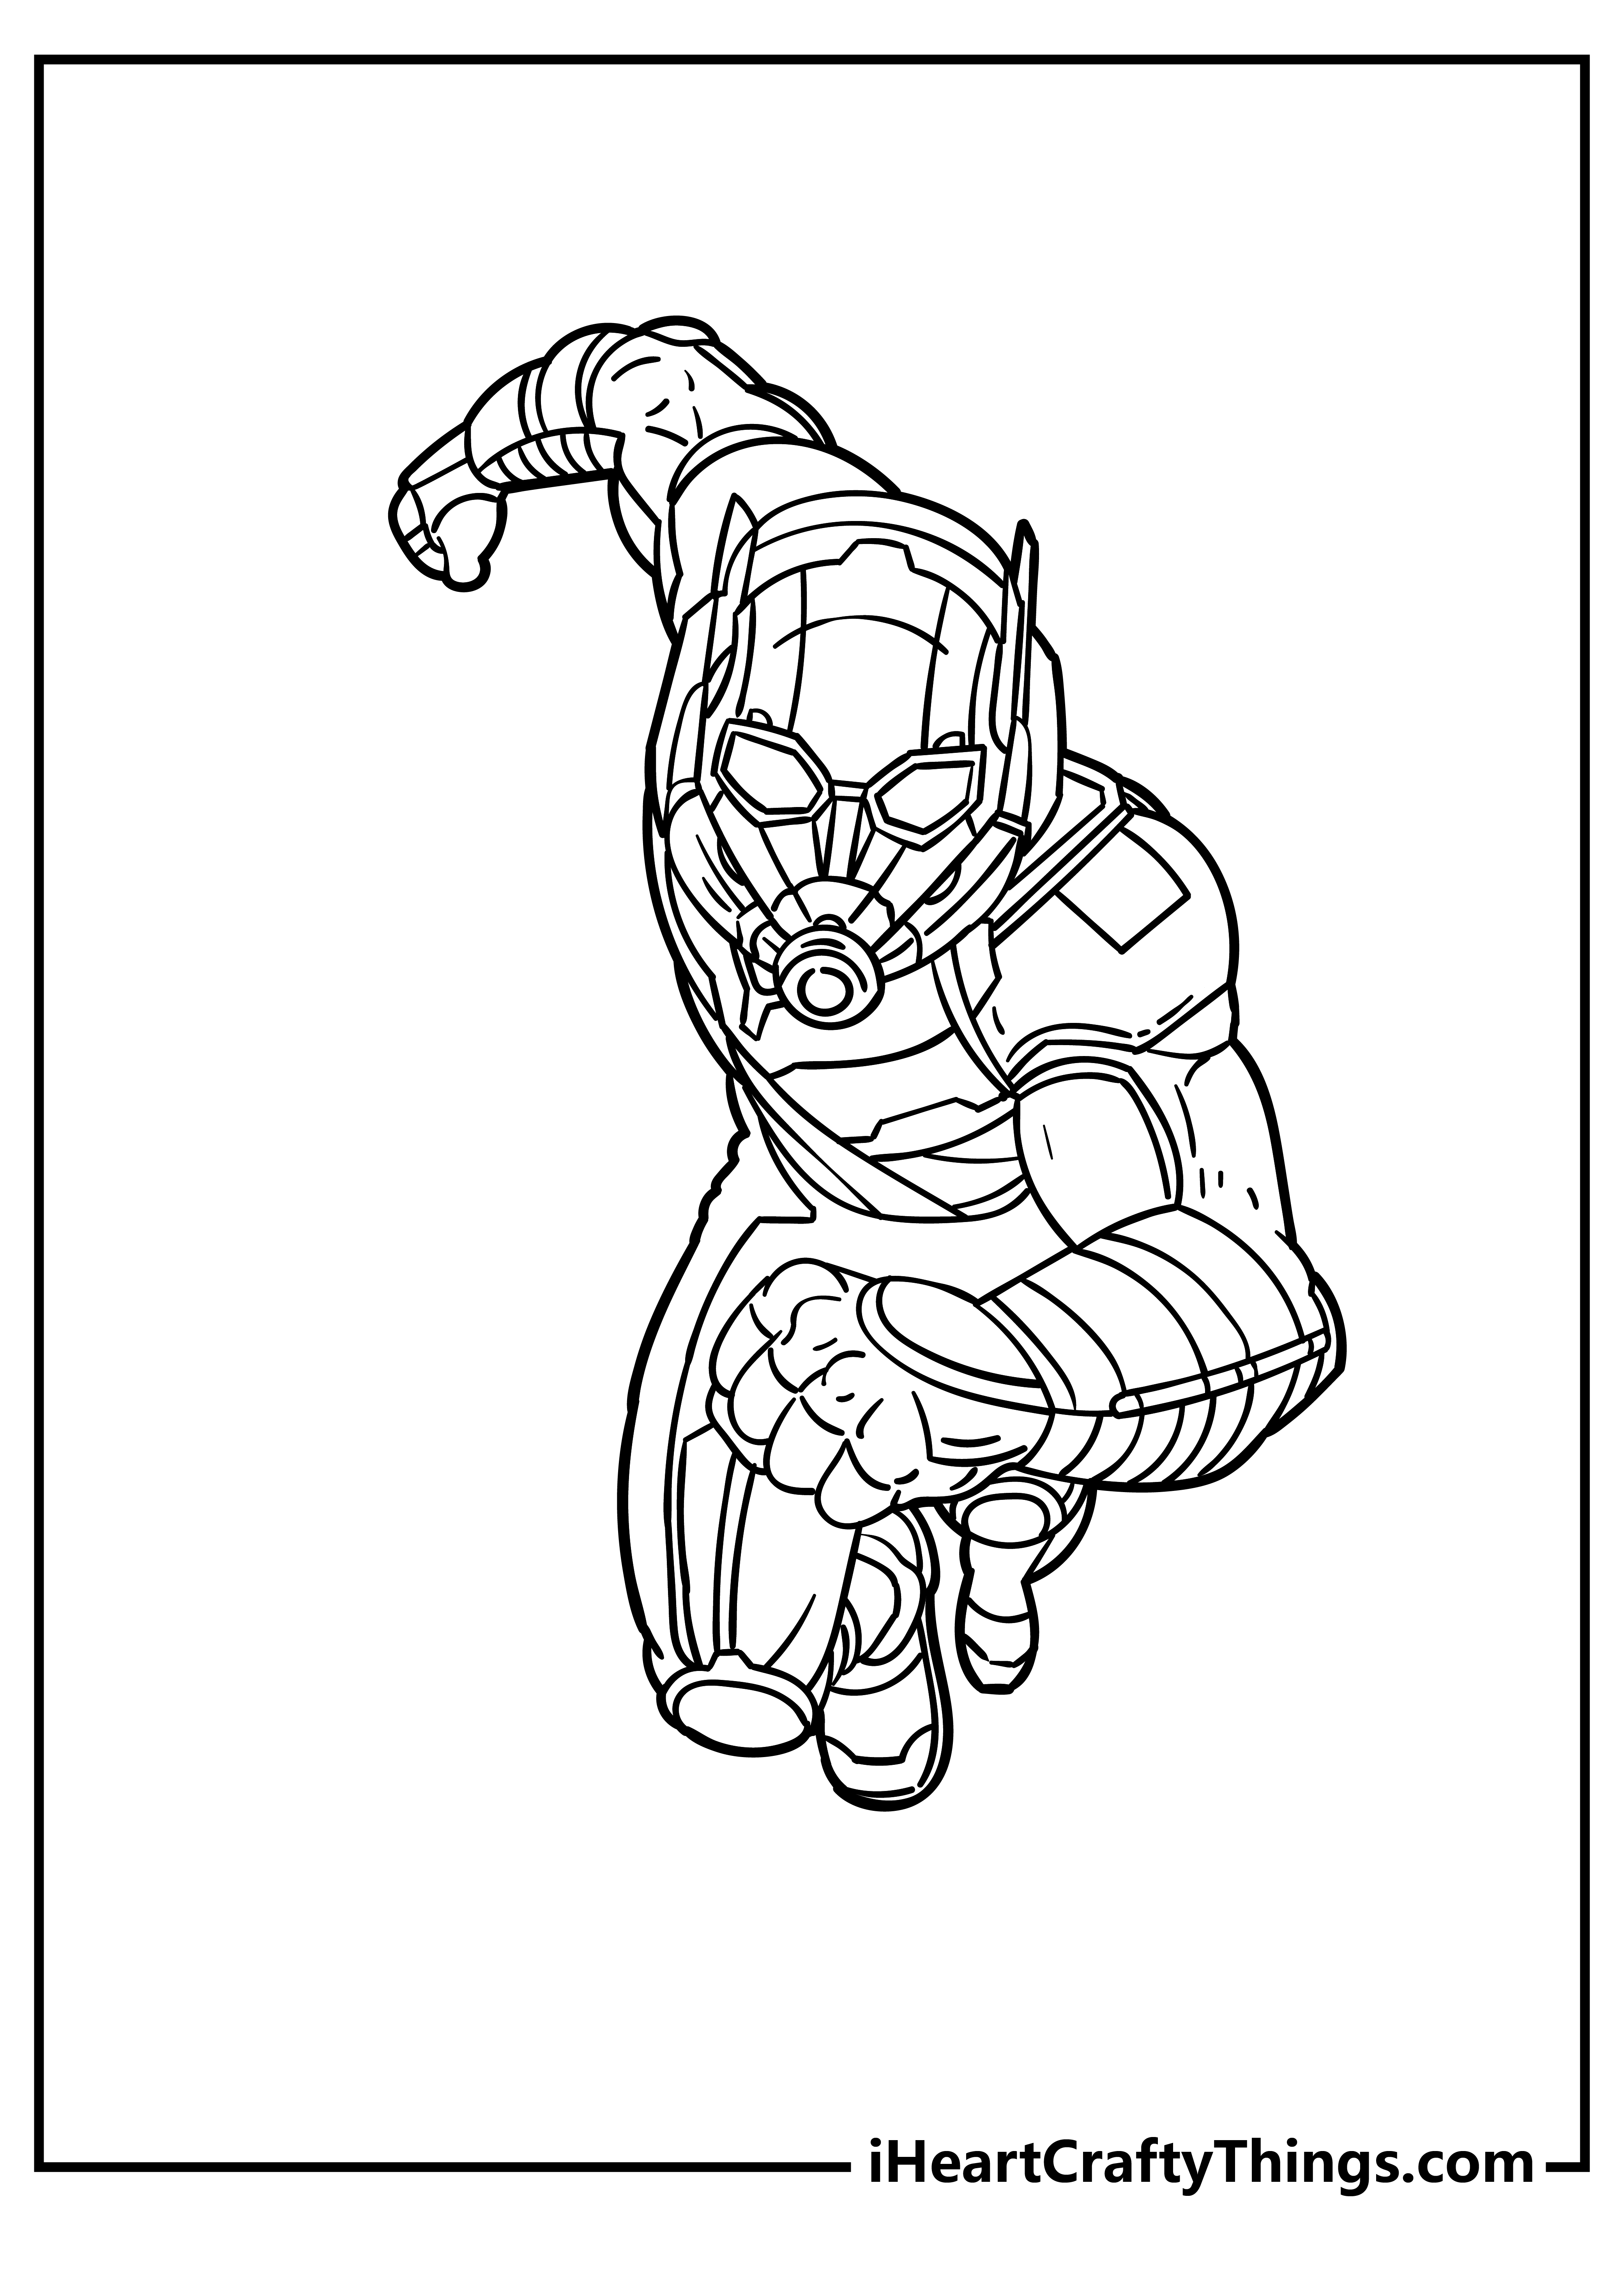 Avengers Coloring Book for kids free printable